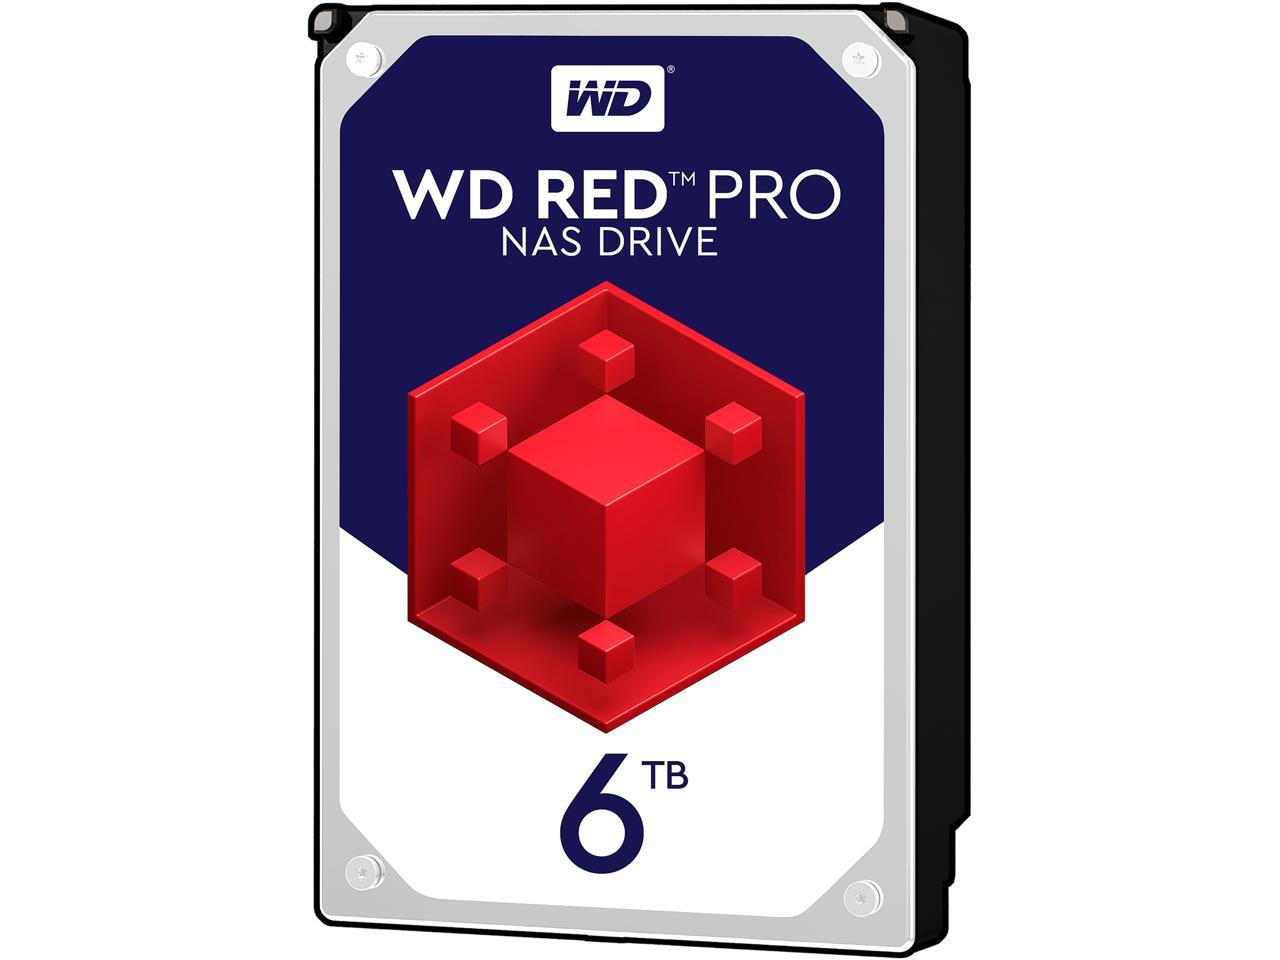 WD Red Pro 6TB NAS Hard Disk Drive - 7200 RPM Class SATA 6Gb/s 128MB Cache 3.5 Inch - WD6002FFWX